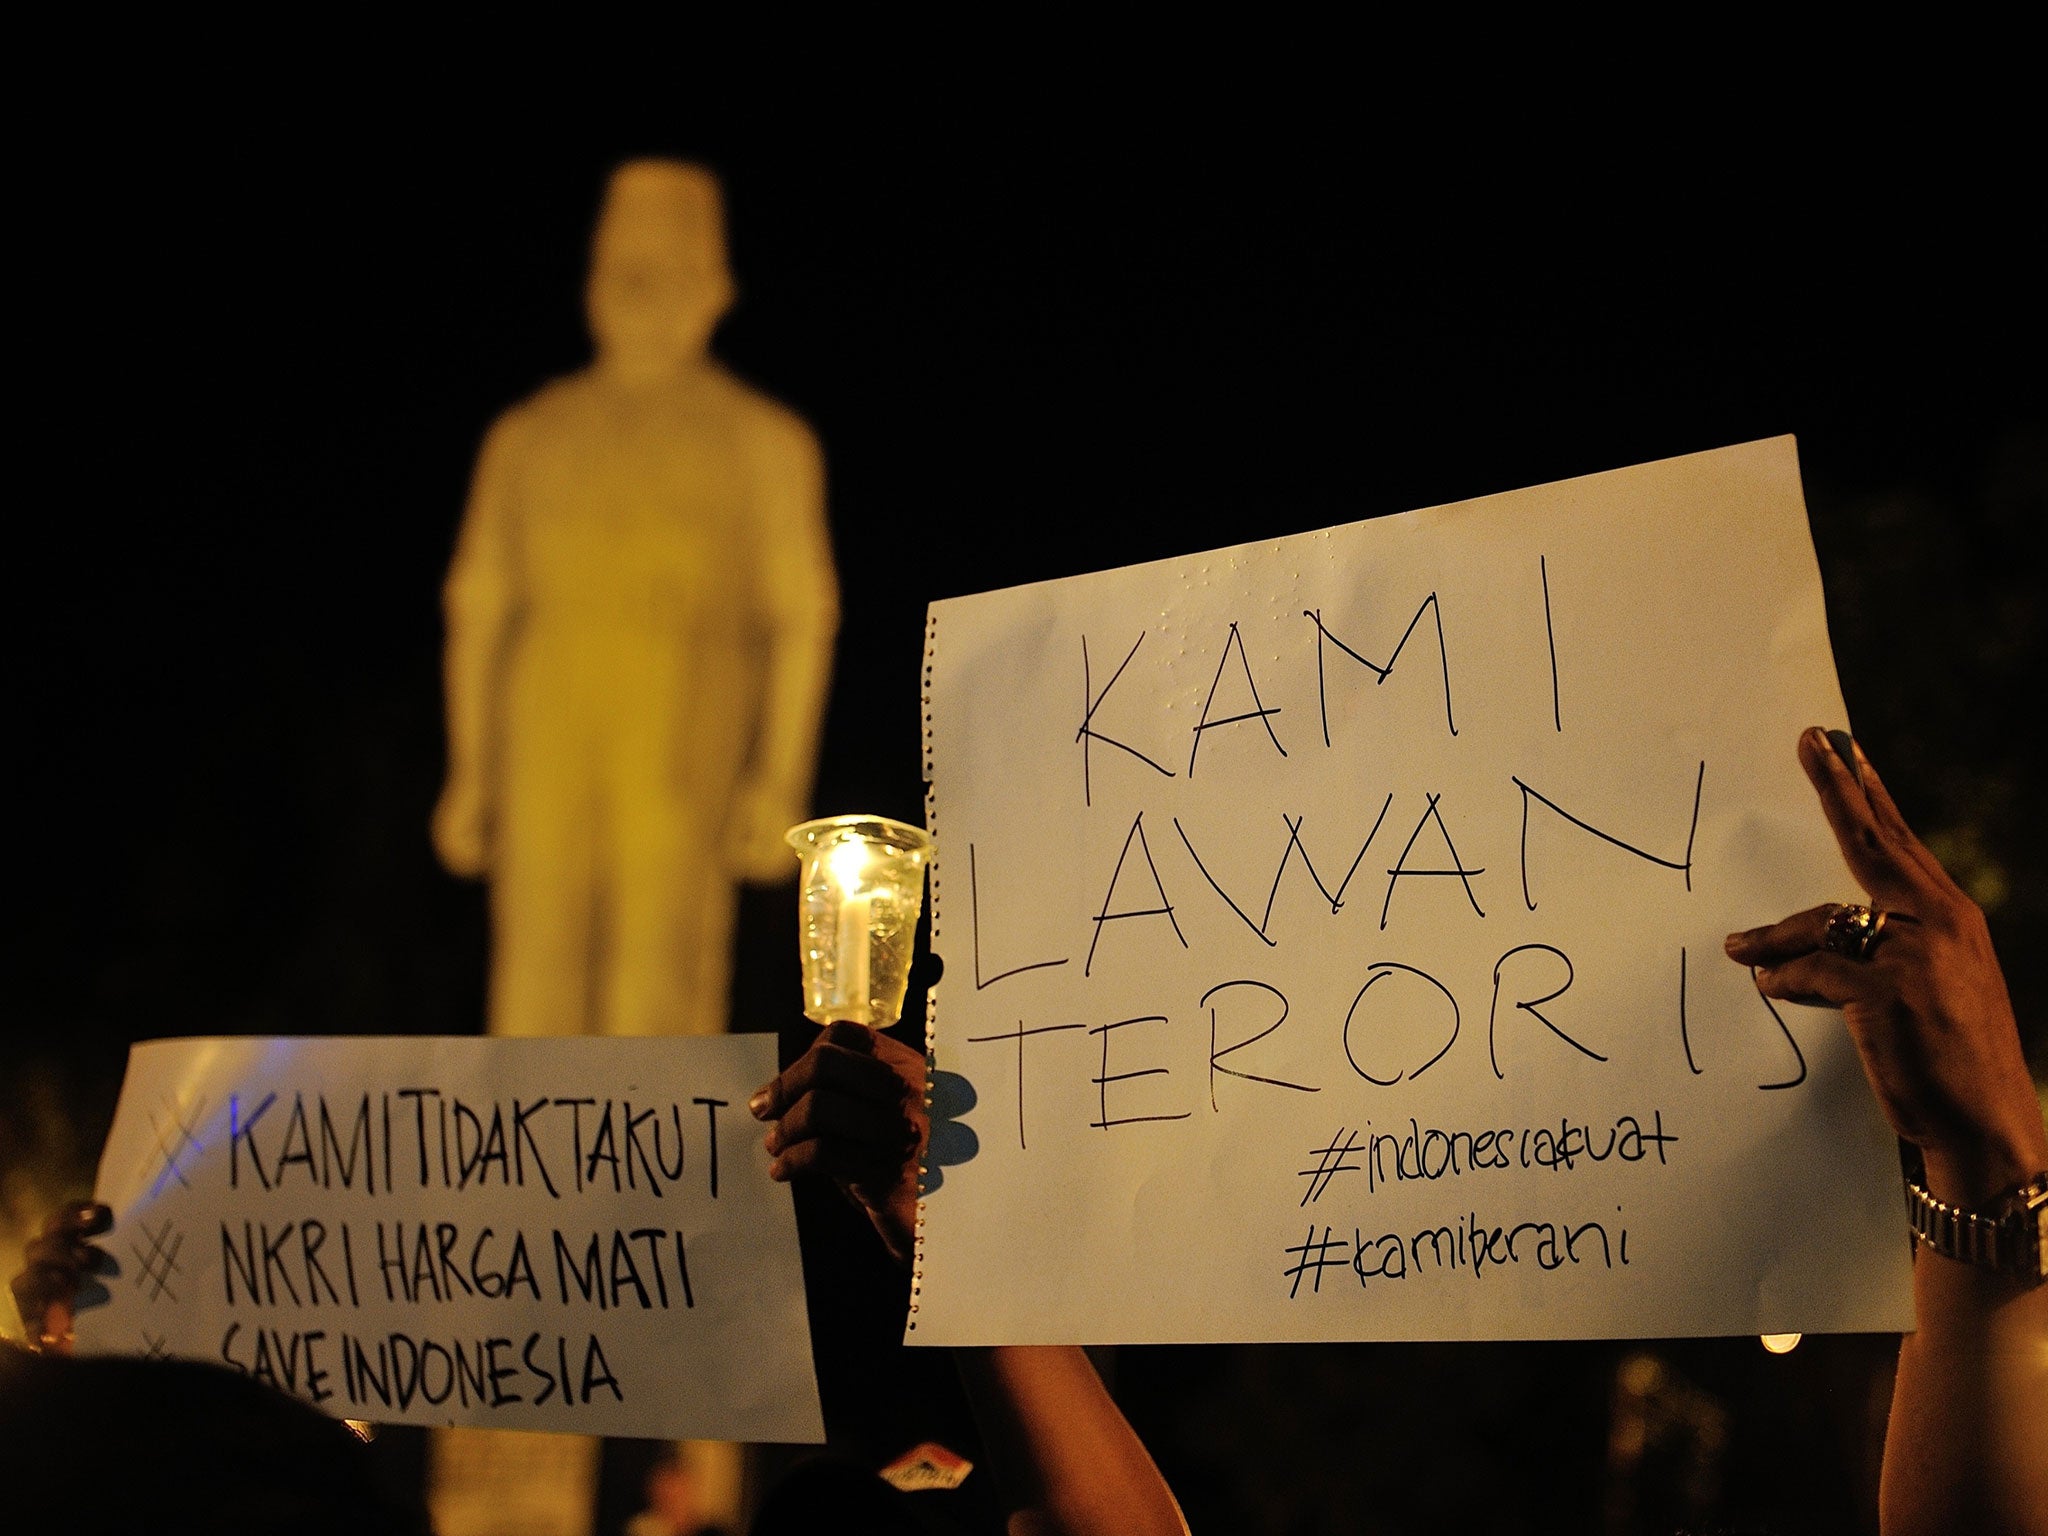 Indonesians protest against terrorism following the attacks in Jakarta on 14 January.